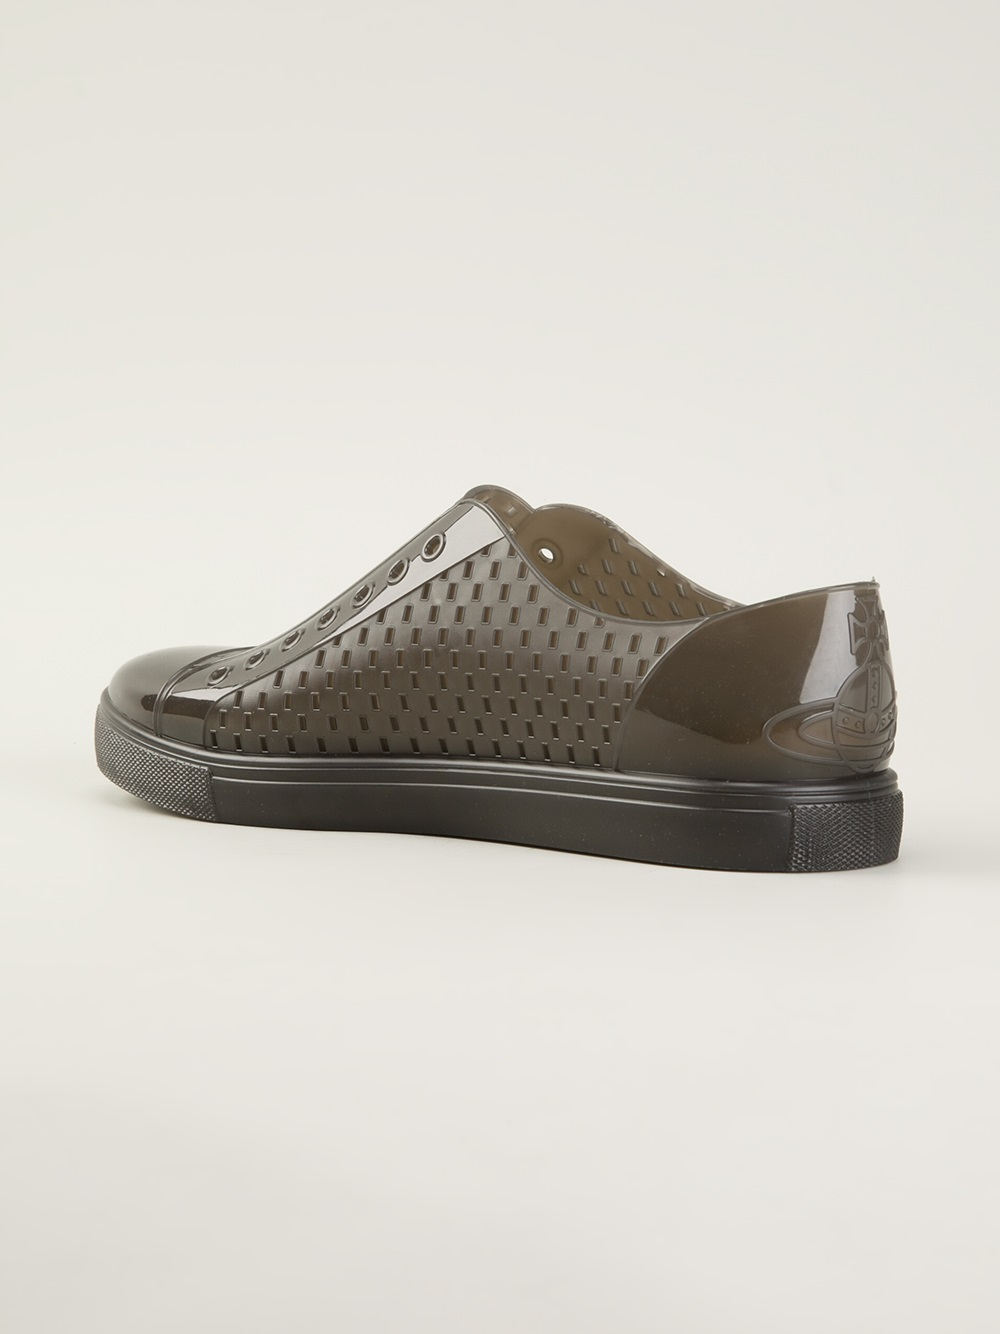 Lyst - Vivienne Westwood Perforated Laceless Sneakers in Gray for Men